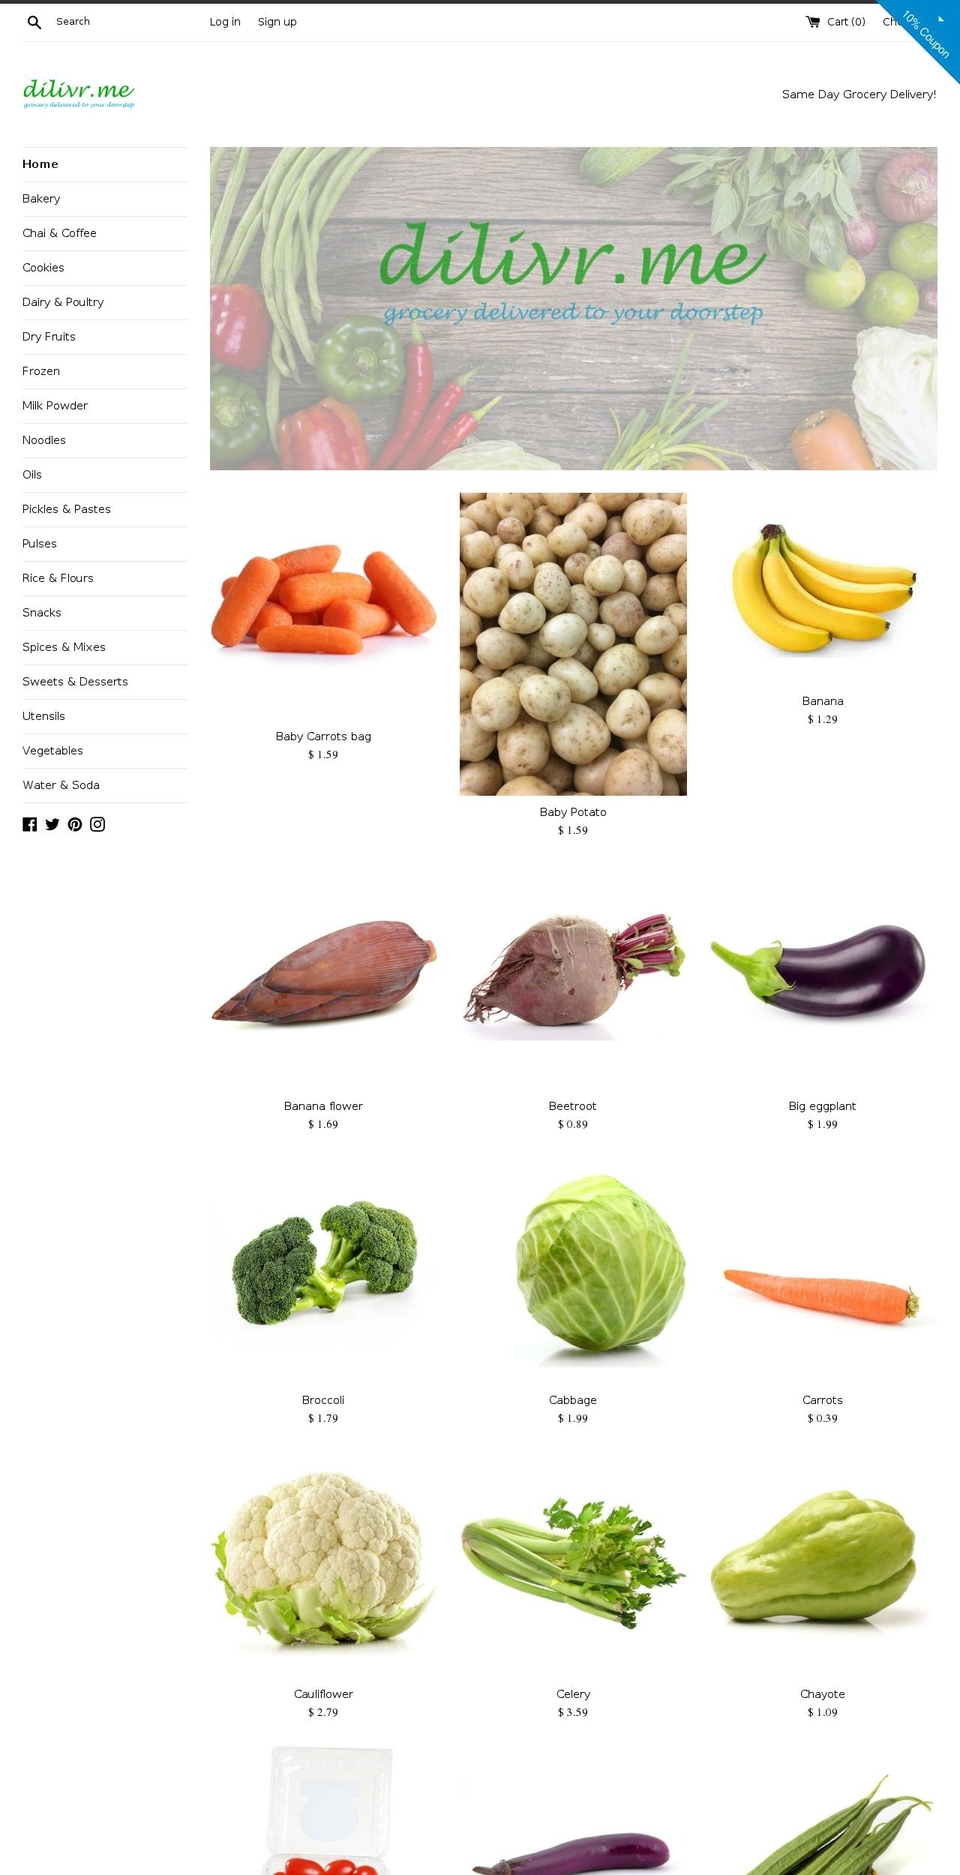 Crave Shopify theme site example dilivr.me